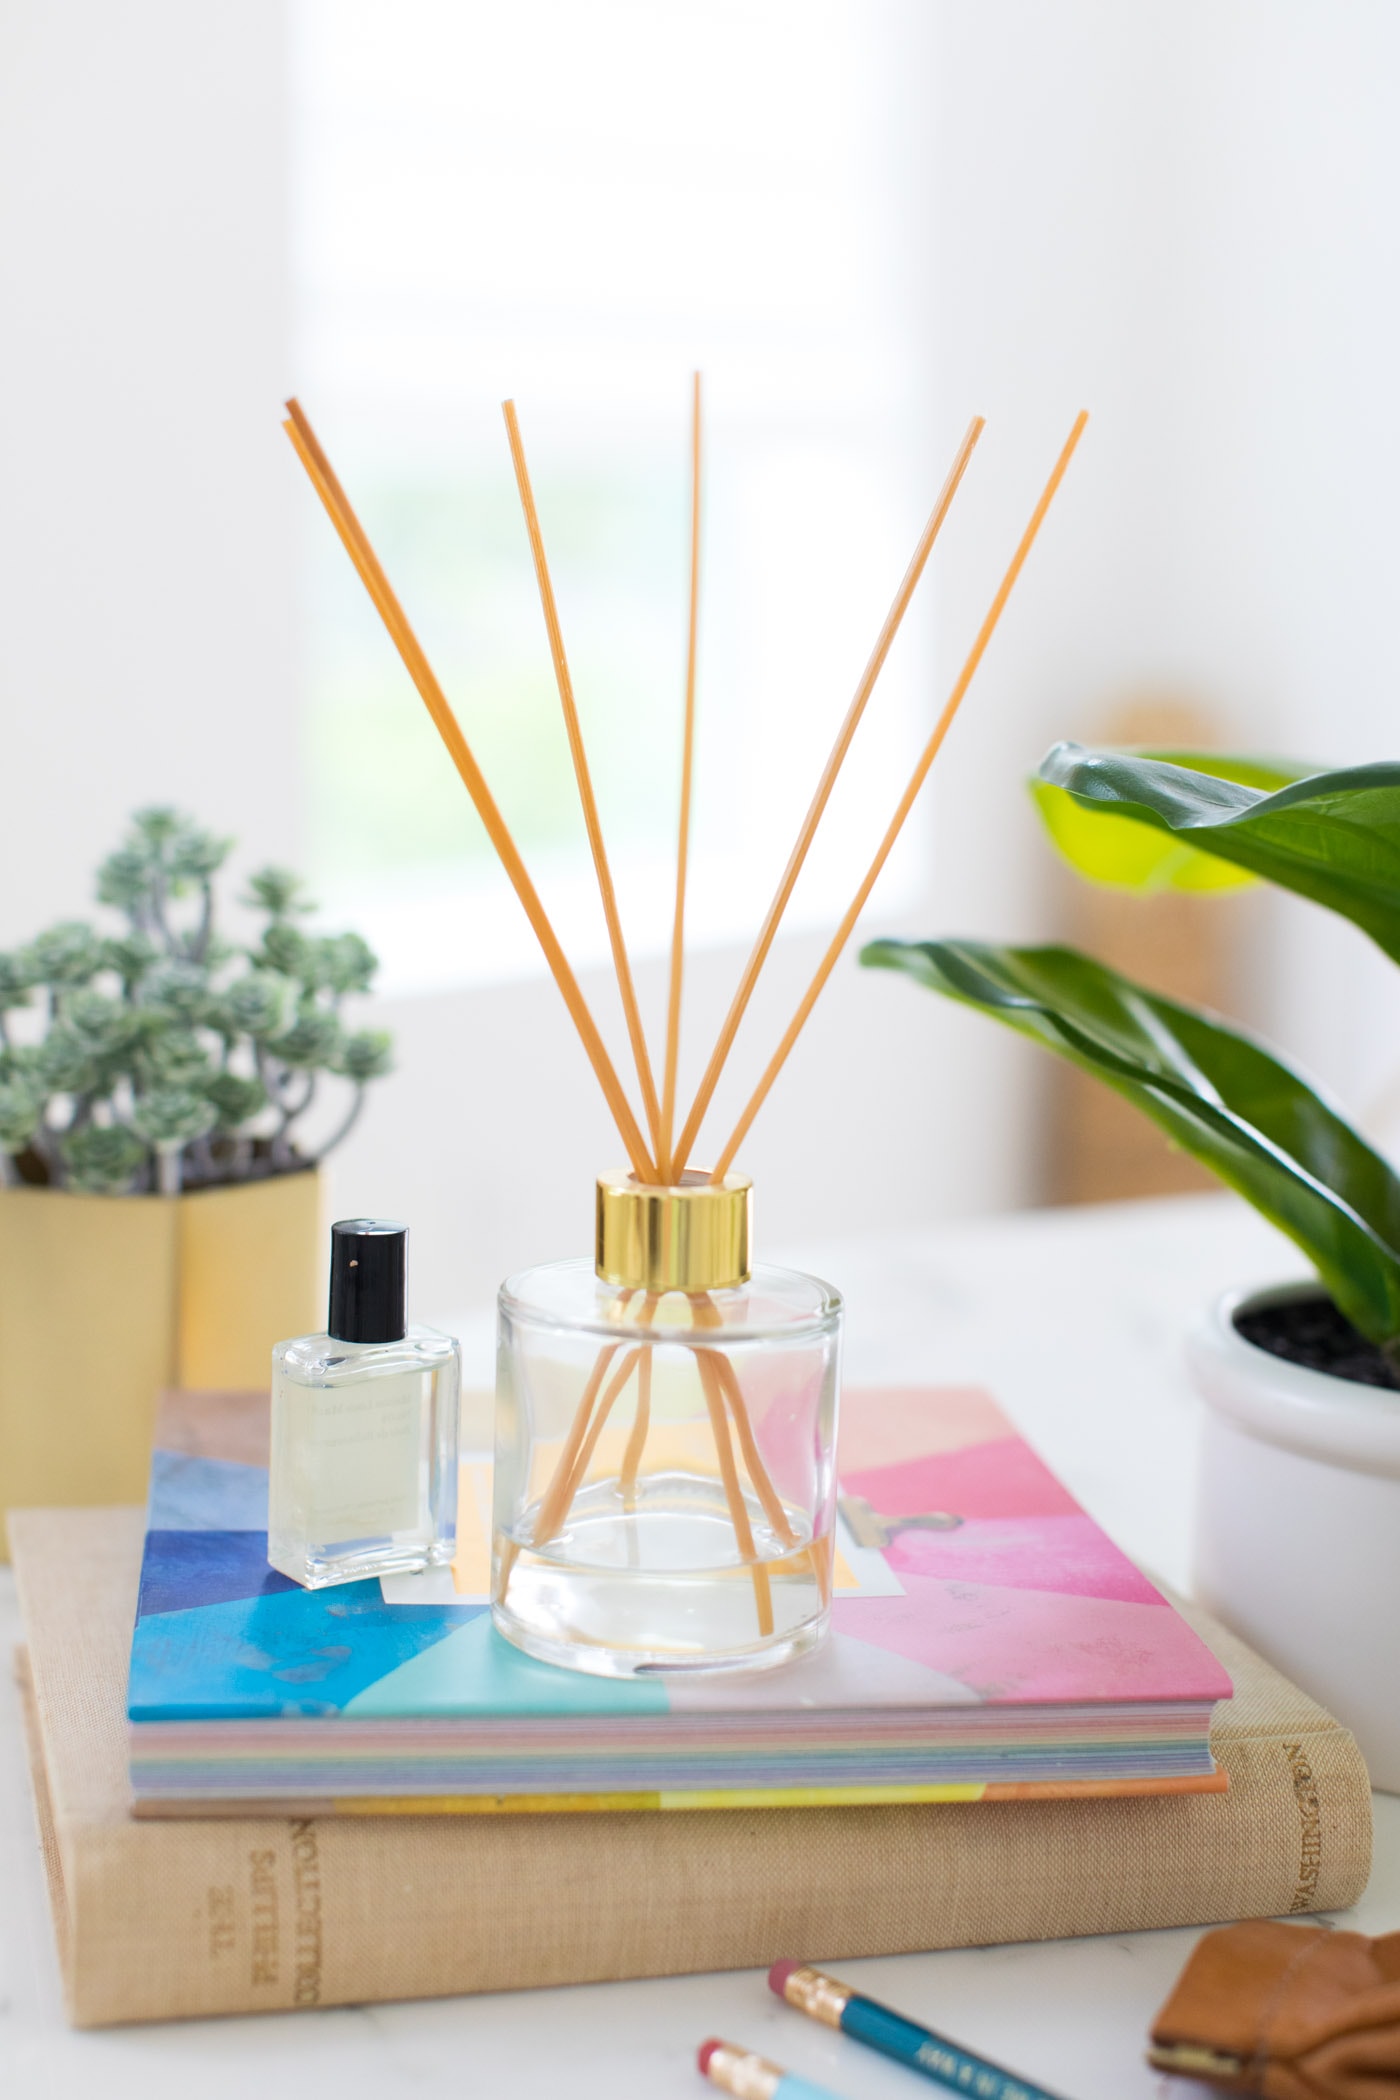 reed diffuser - photo of a diy essential oil diffuser with reeds